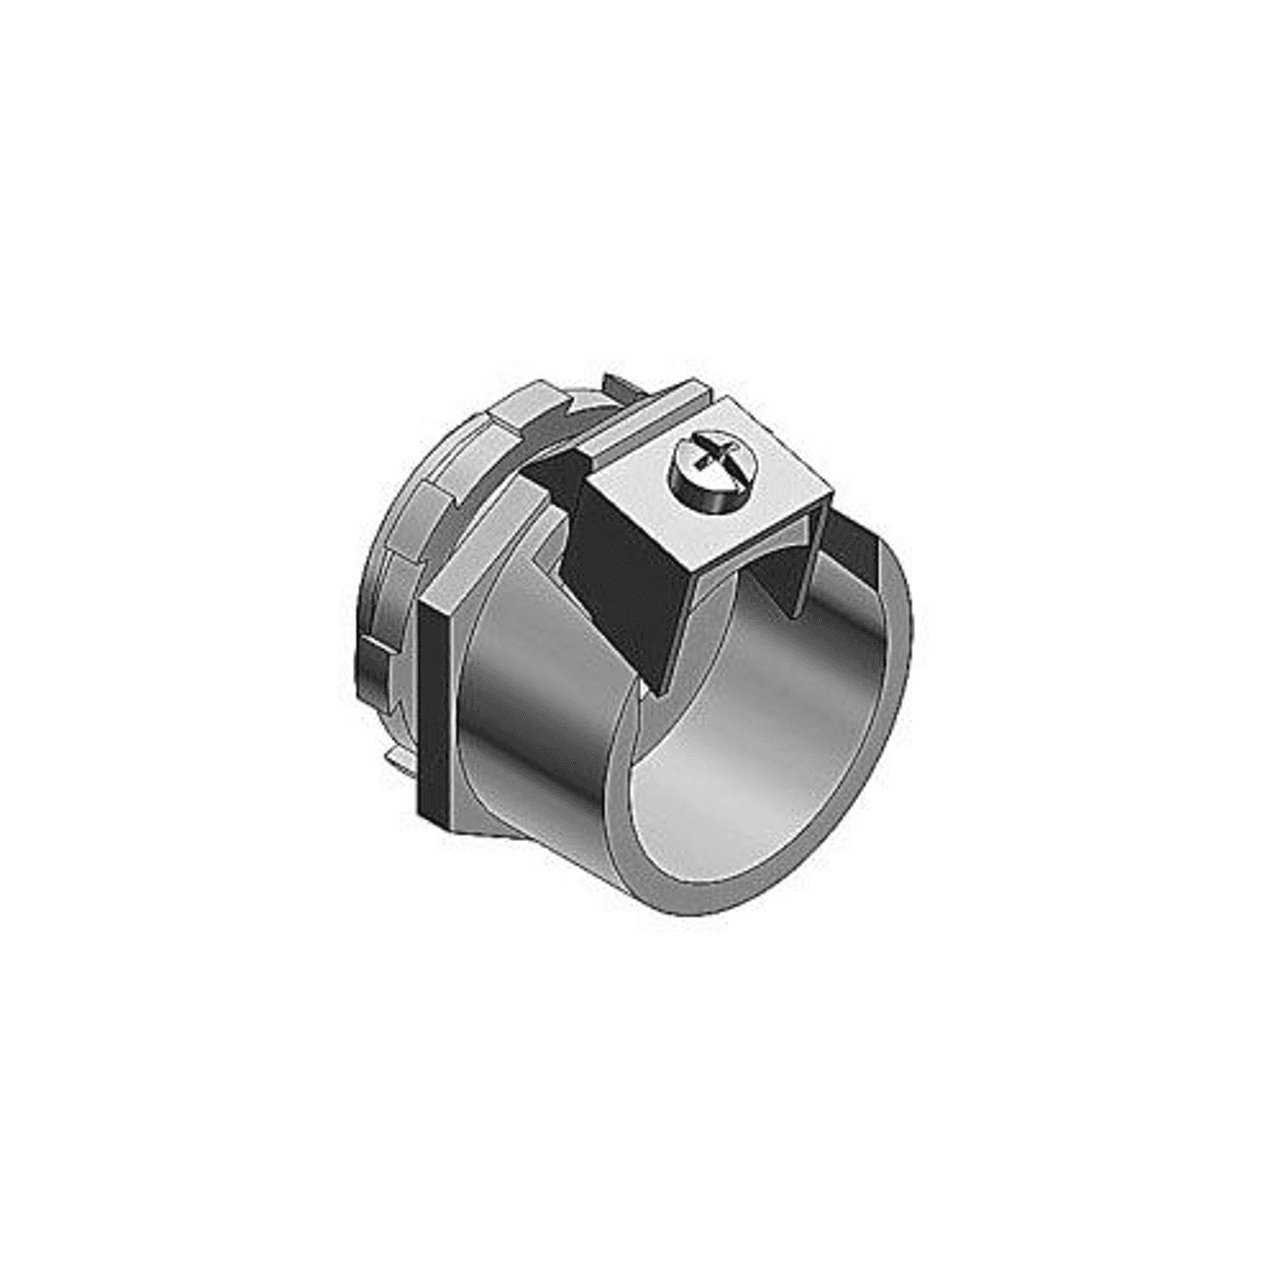 Thomas & Betts 308 1-1/4", 1.562 to 1.75" Cable, Electro Zinc Plated Malleable Iron, Screw, Saddle, Non-Insulated Throat, Single Cable Opening, Straight, Armored/Metal Clad Cable Connector